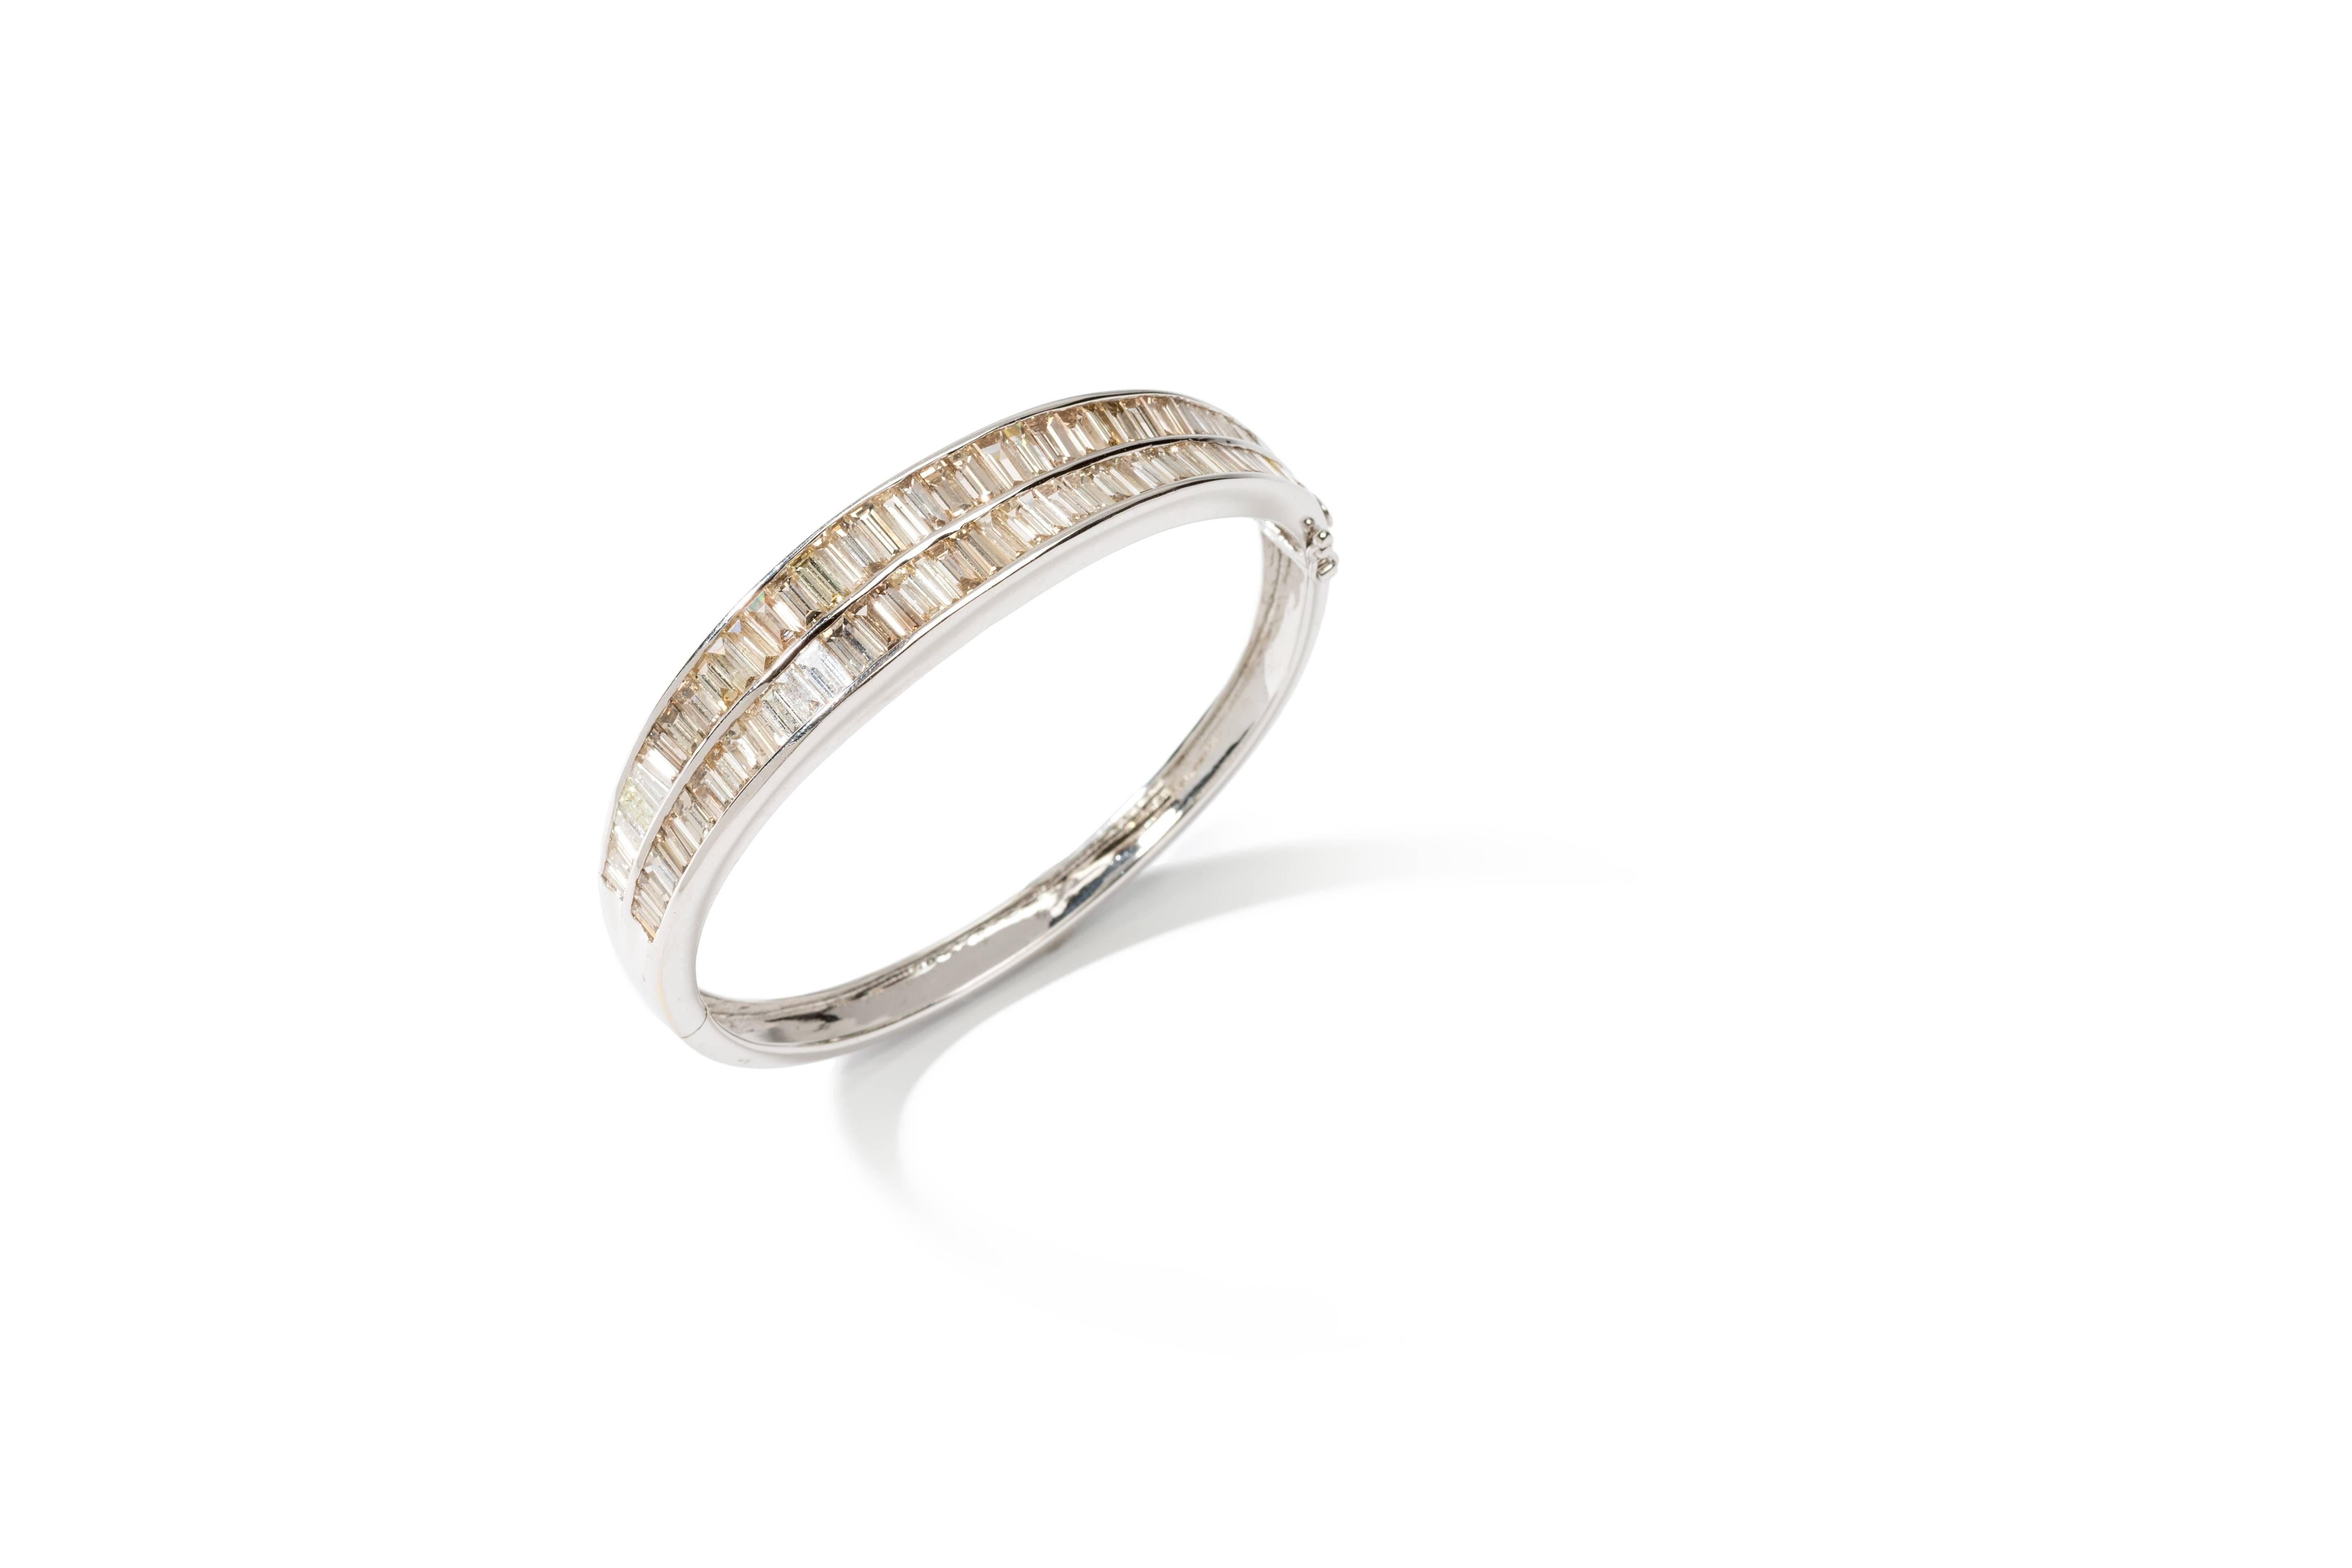 Designed with two rows 77 baguette-cut diamonds weighing 10,81 ct. Mounted in 18 carat white gold. Hallmarked inside: 750, DG in quadrat. Total weight: 29,77 grams. Measurements: 1.97 x 2.28 in ( 5 x 5,8 cm )